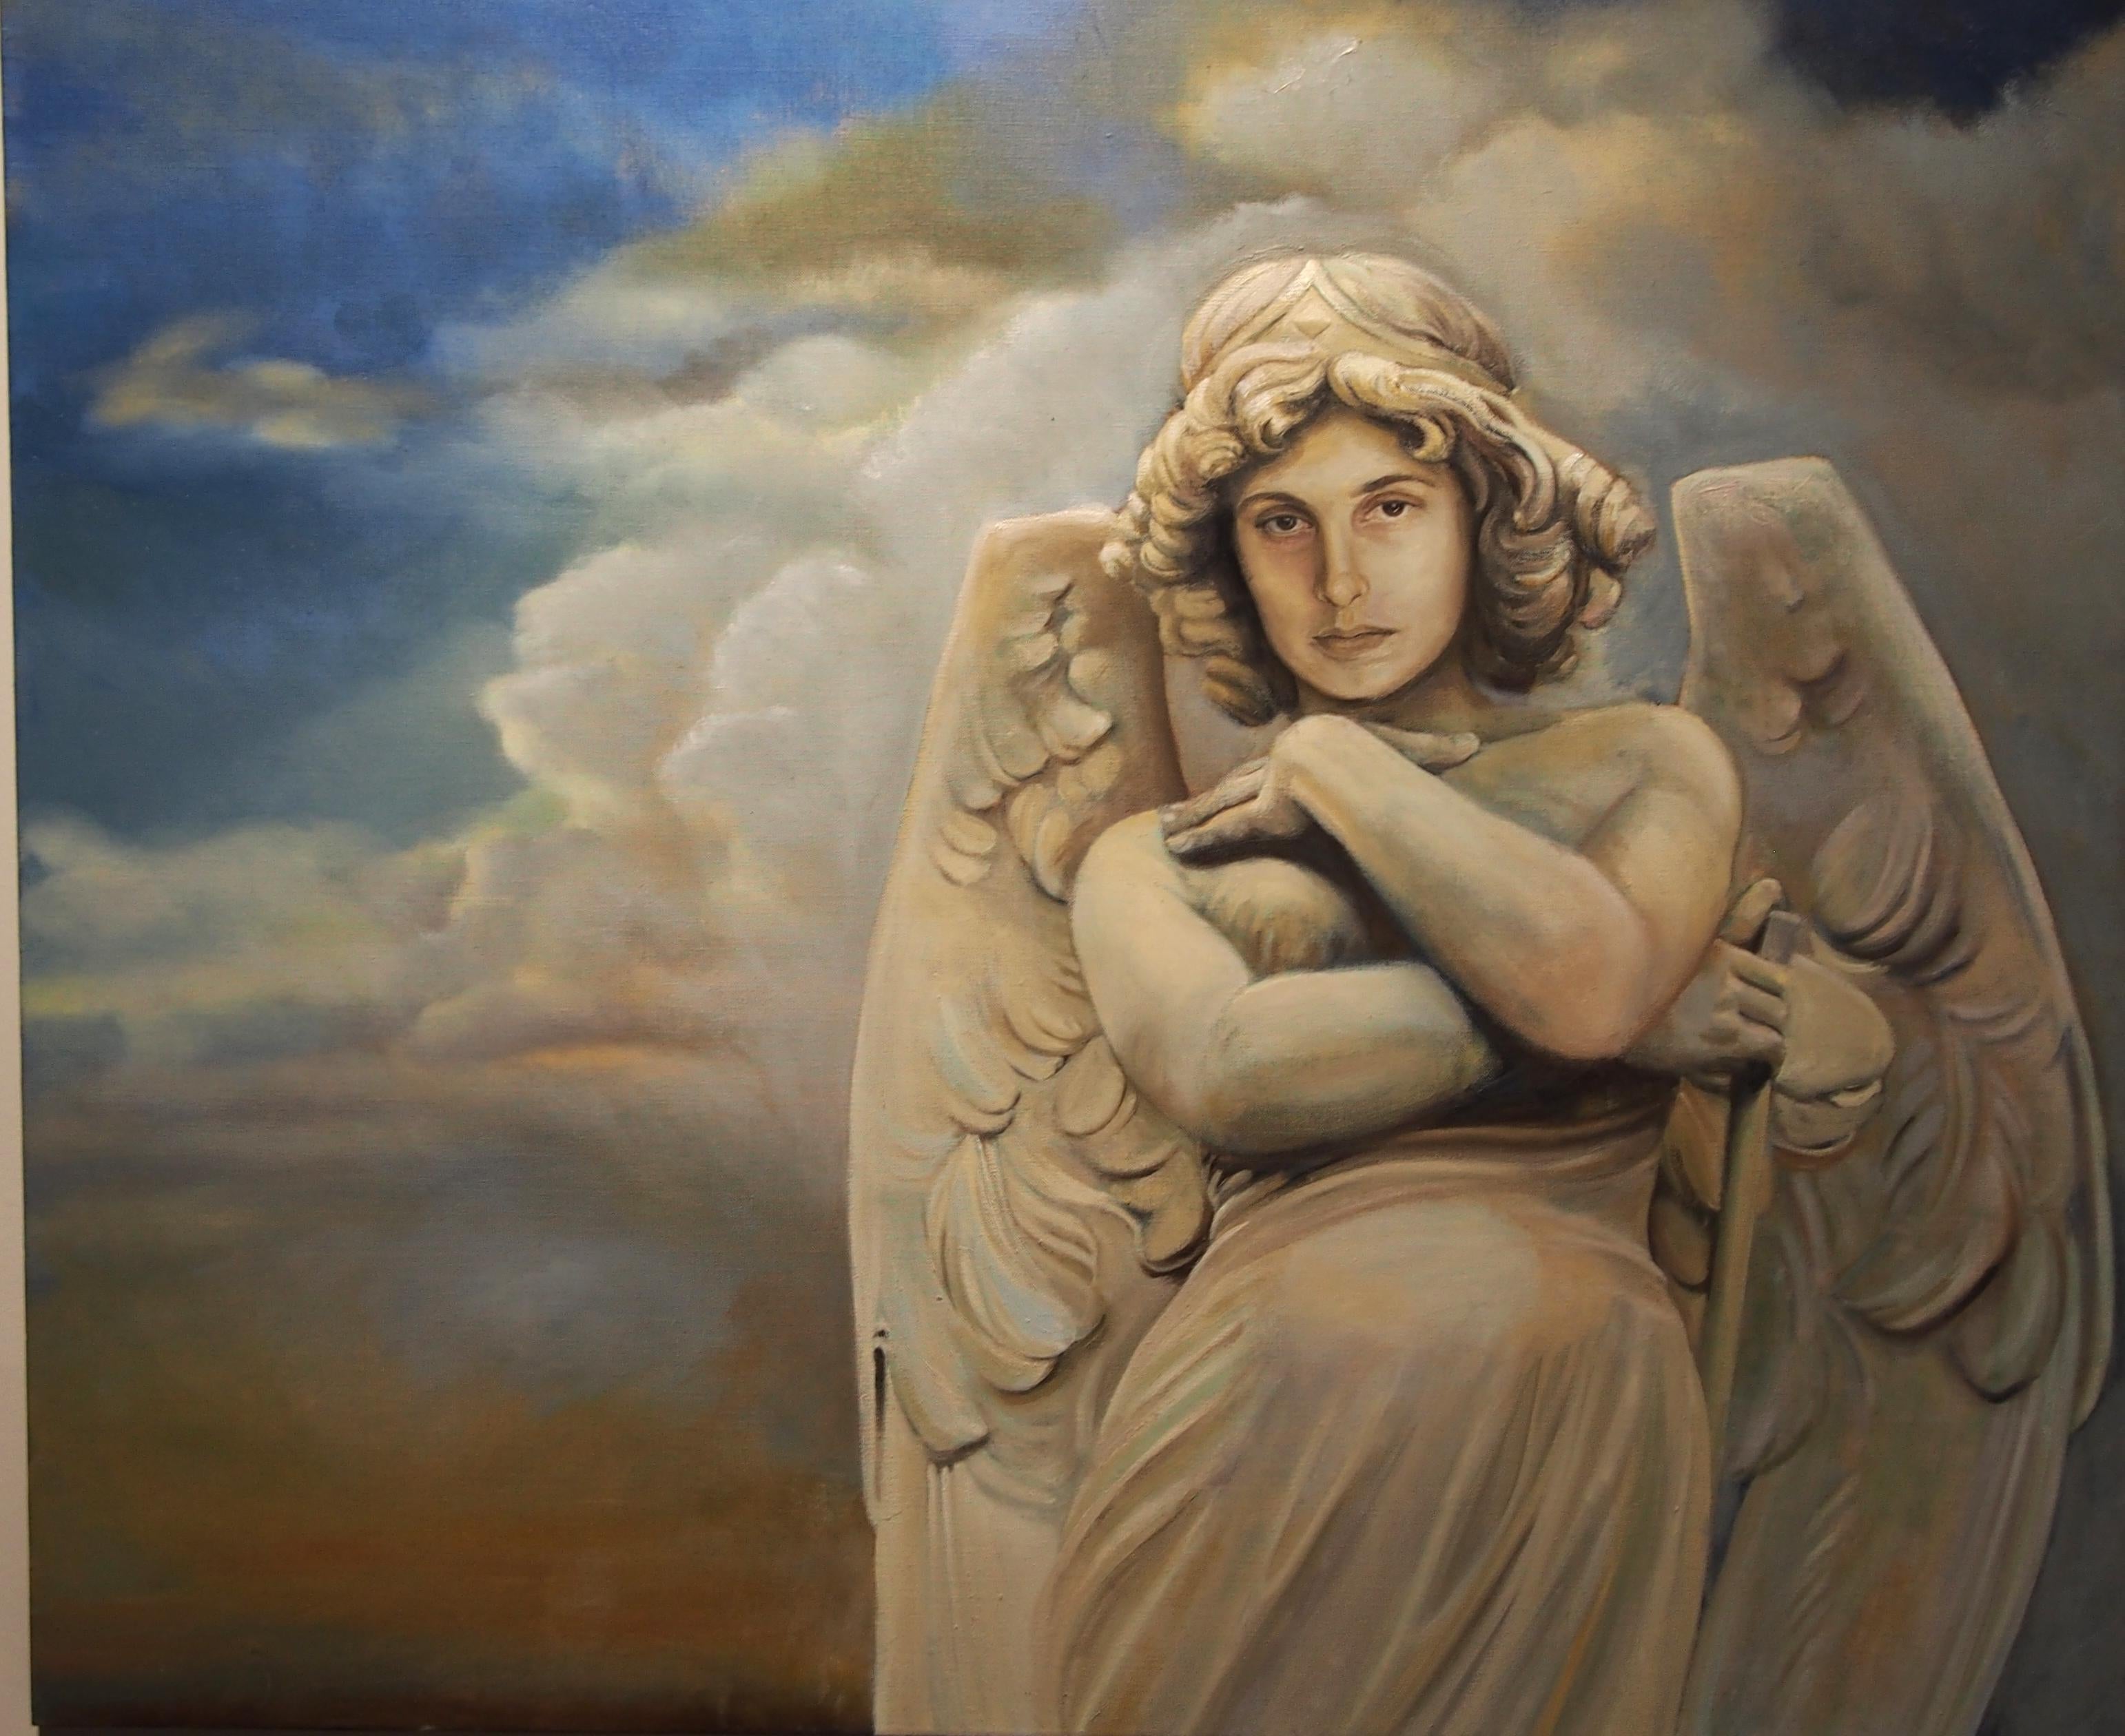 This painting is one of a series of paintings of cemetery stone angels - reimagined. The cemetery angel represents the best aspects of humanity in that they are monuments that are erected by grieving individuals for loved ones. They are expressions